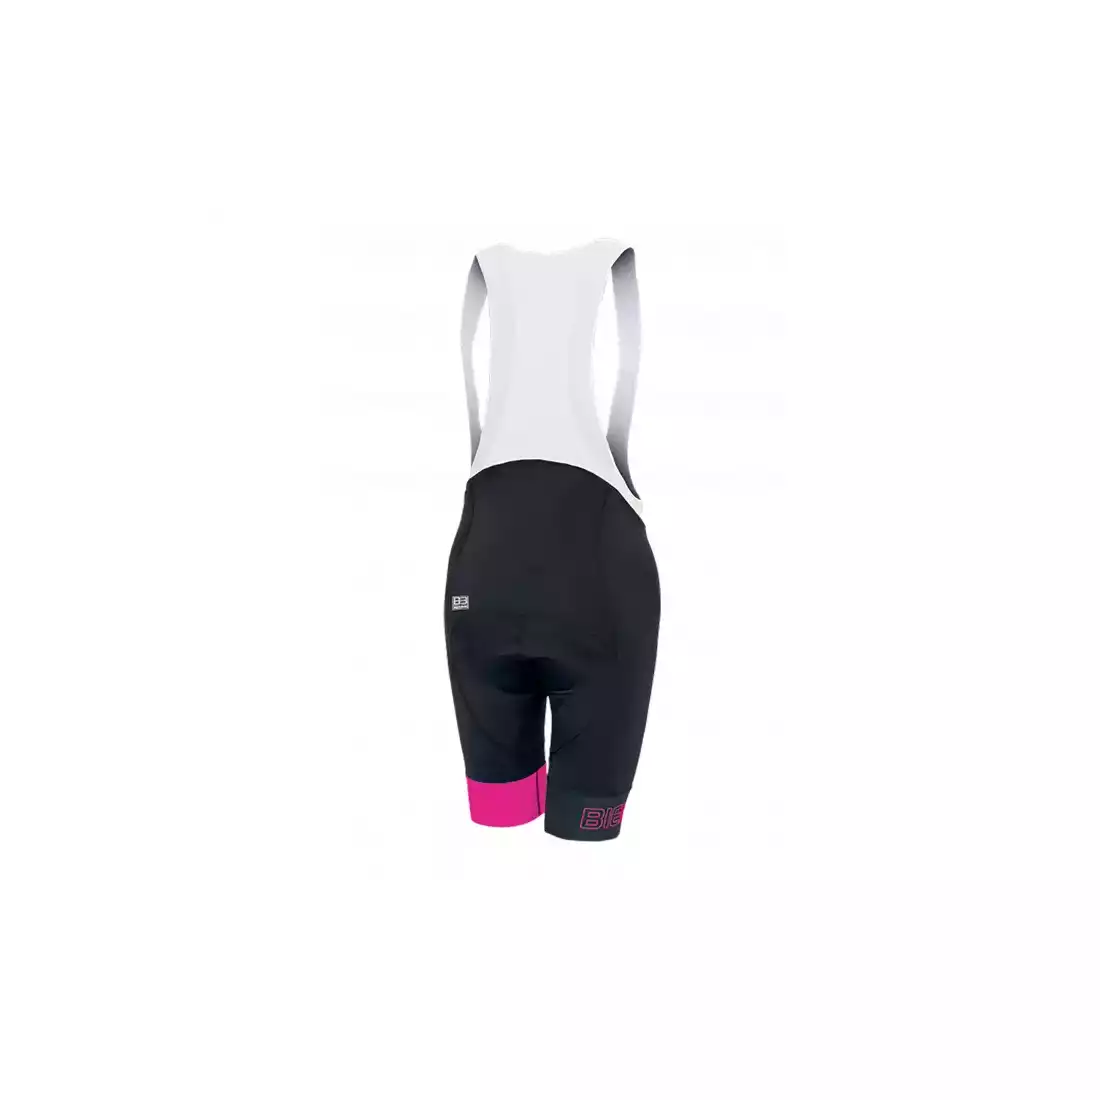 Biemme LEGEND ECO LADY women's cycling shorts with braces, black and pink